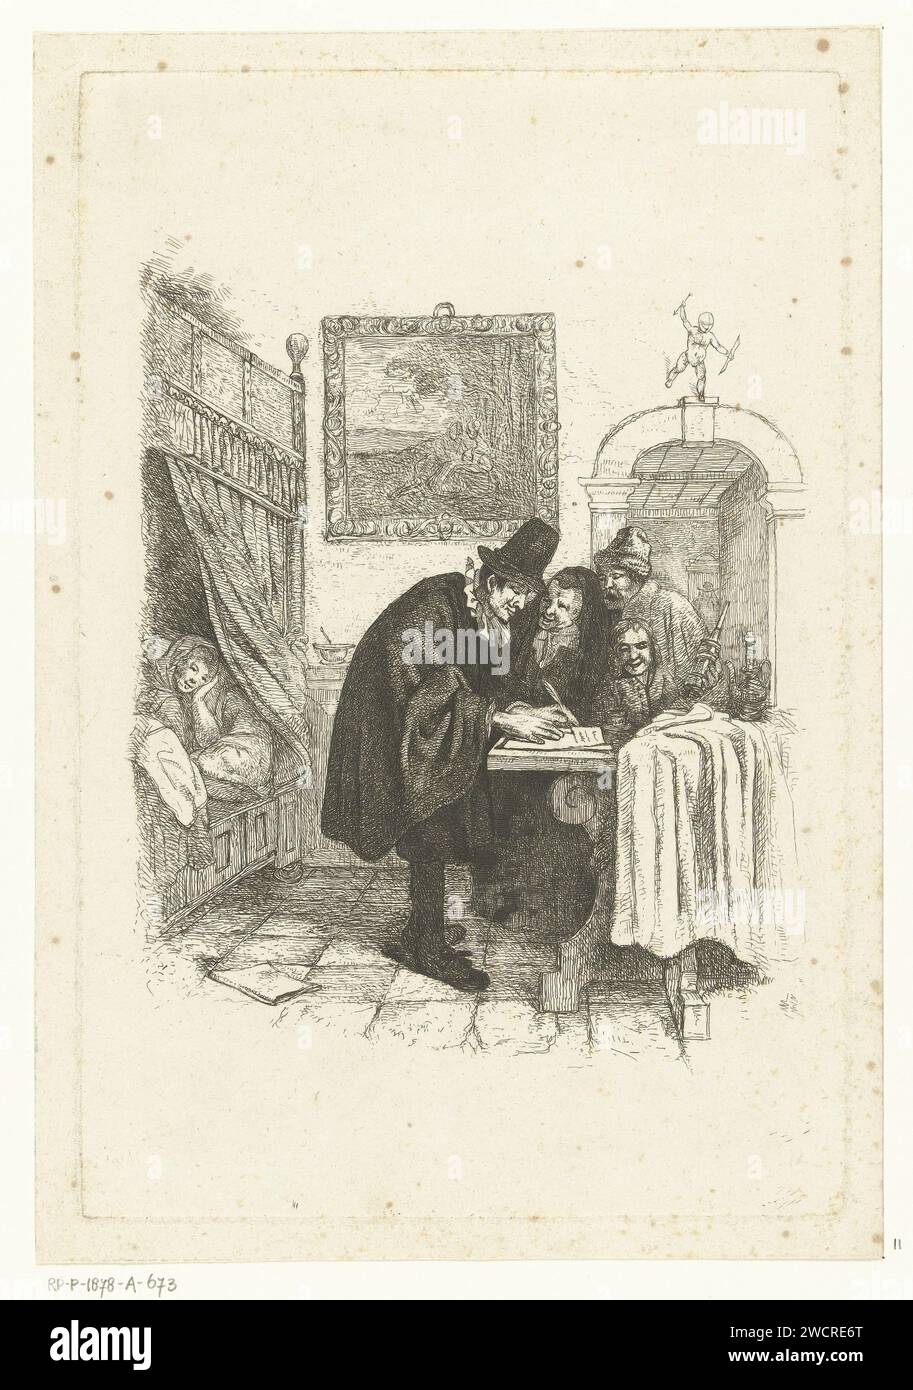 Doctor on a home visit to sick wife, Albertus Brondgeest, After Jan Havicksz. Steen, 1796 - 1849 print A doctor writes a recipe standing at a table. An old woman, a man with a cloud spray and a boy watch. The patient, a sick woman, is in bed. In the interior there is a painting on the wall with a pastoral scene. On top of the bar is a small statue of Amor. Netherlands paper etching physician, doctor. sick-bed Stock Photo